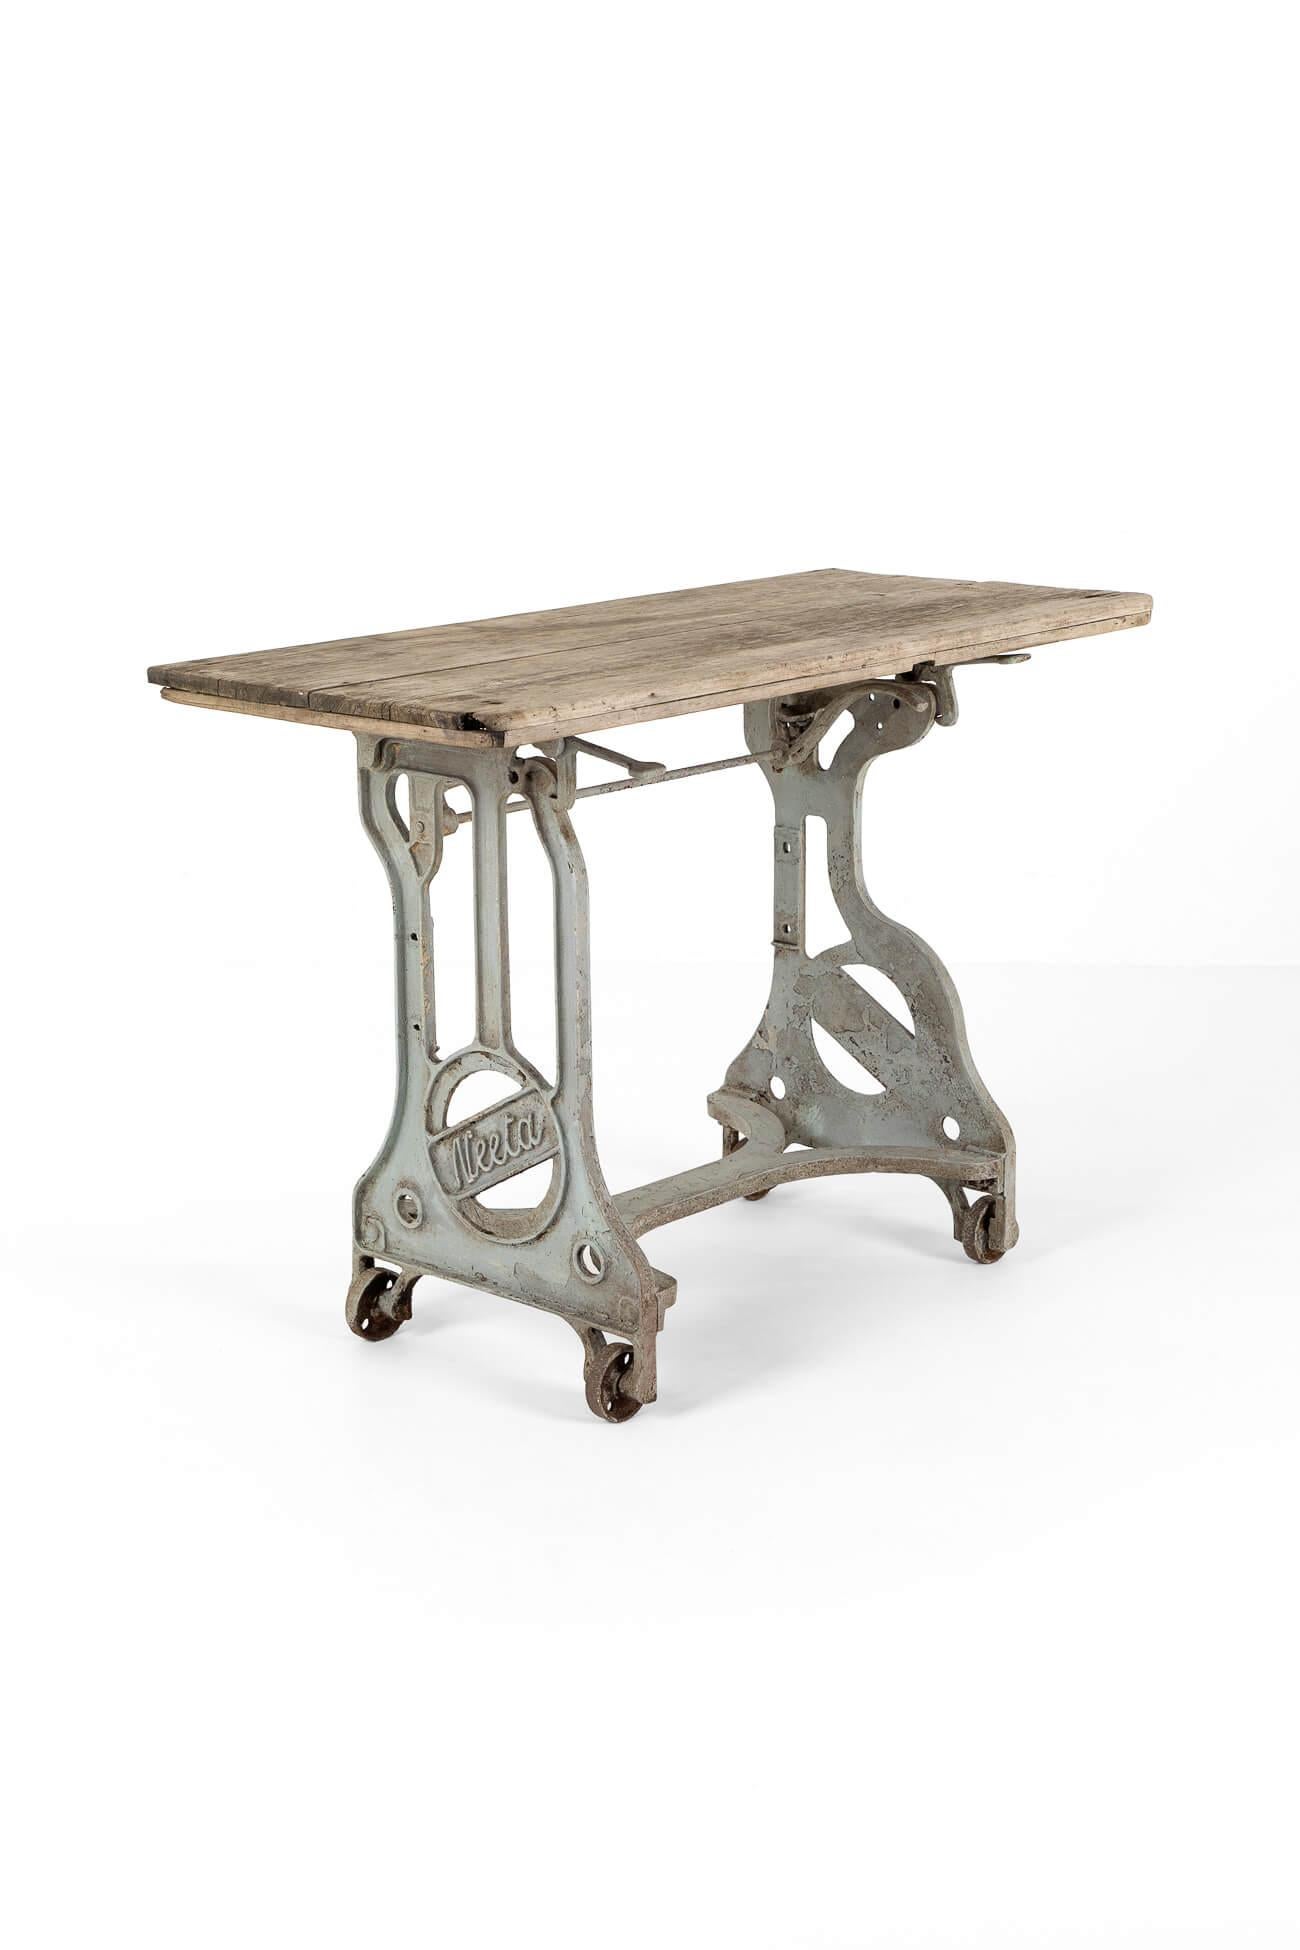 A superb industrial worktable by the manufacturing company Neeta.

The table top of silvered oak is perfectly weathered and attached to the cast iron base with two large bracket hinges. A catch on the base releases the bracket, allowing the tabletop